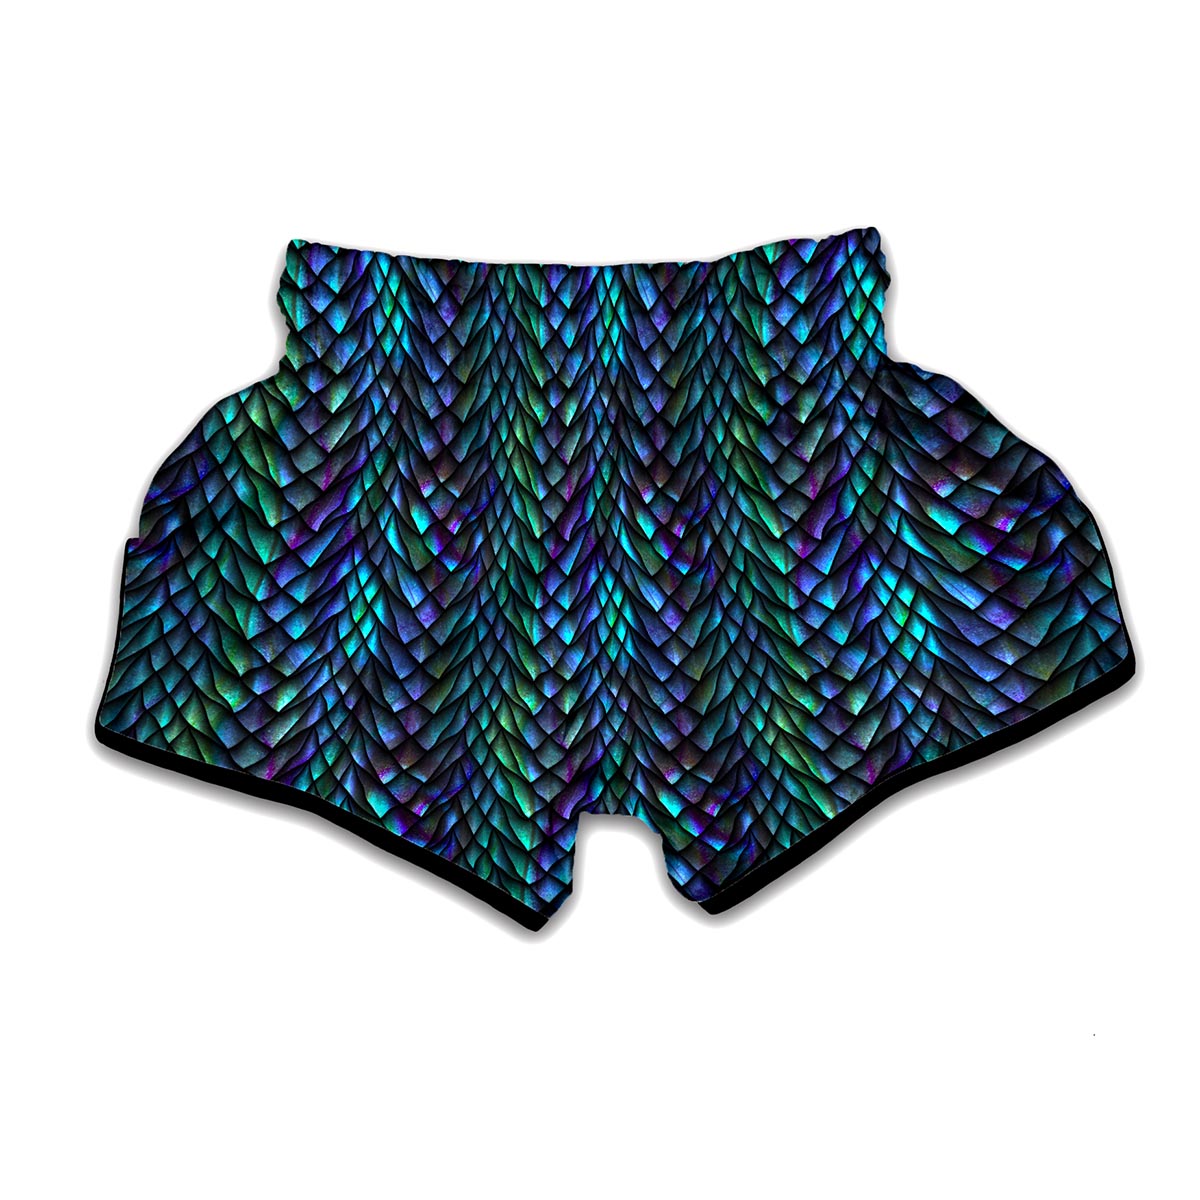 Turquoise Dragon Scales Pattern Print Muay Thai Boxing Shorts